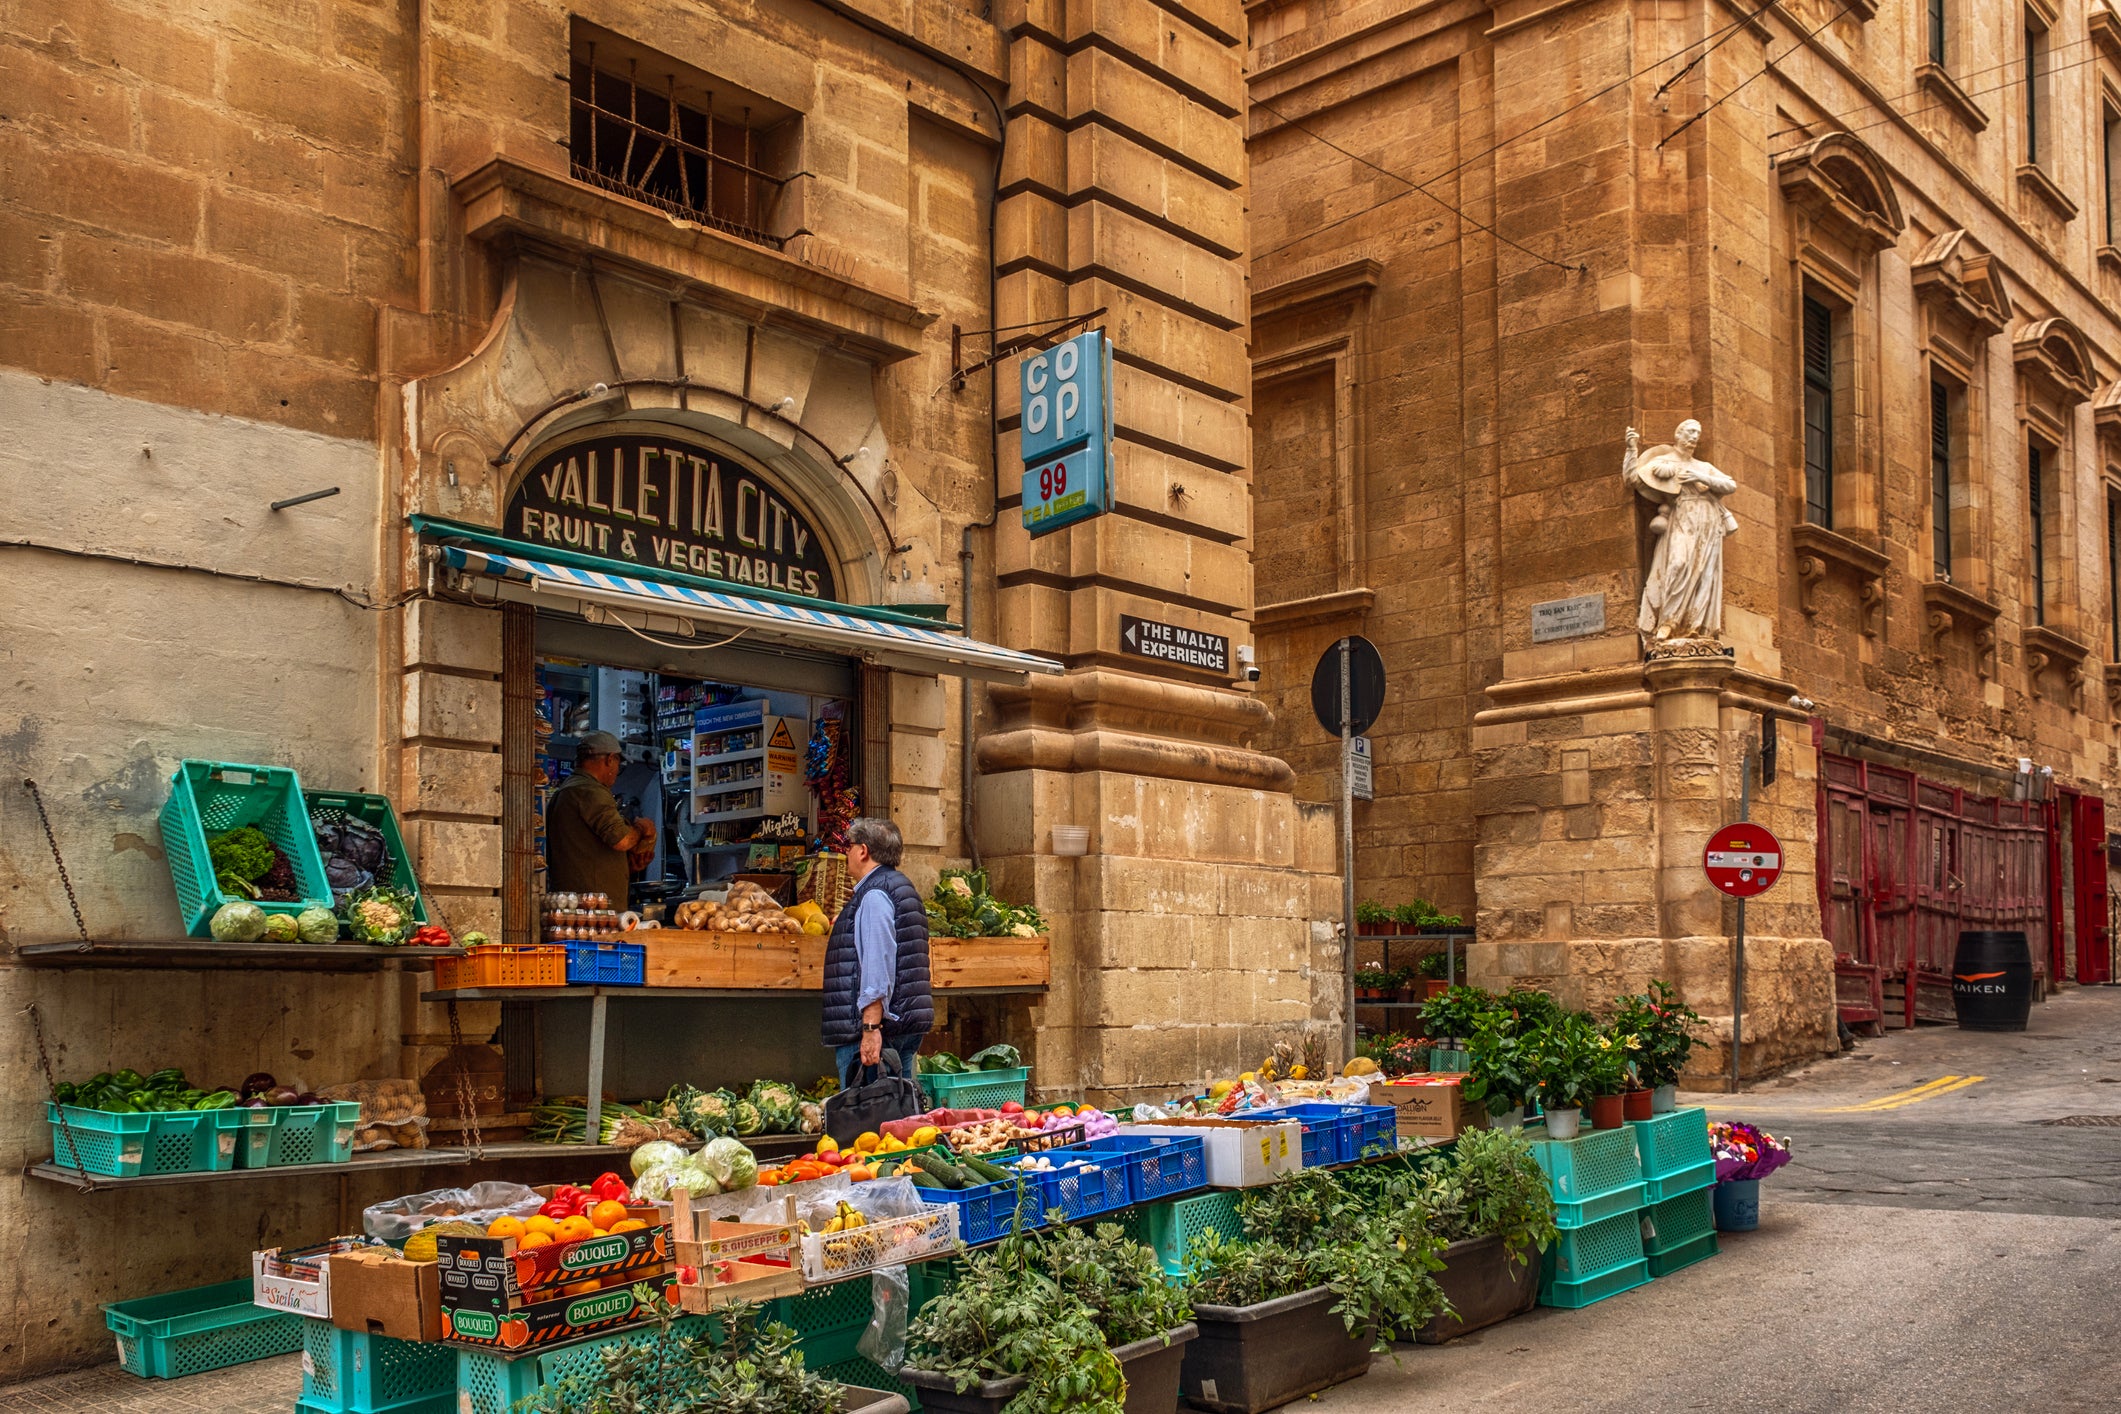 From rabbit stew to pea-filled pastries and stuffed eggplant, there’s something for every palette in Valletta